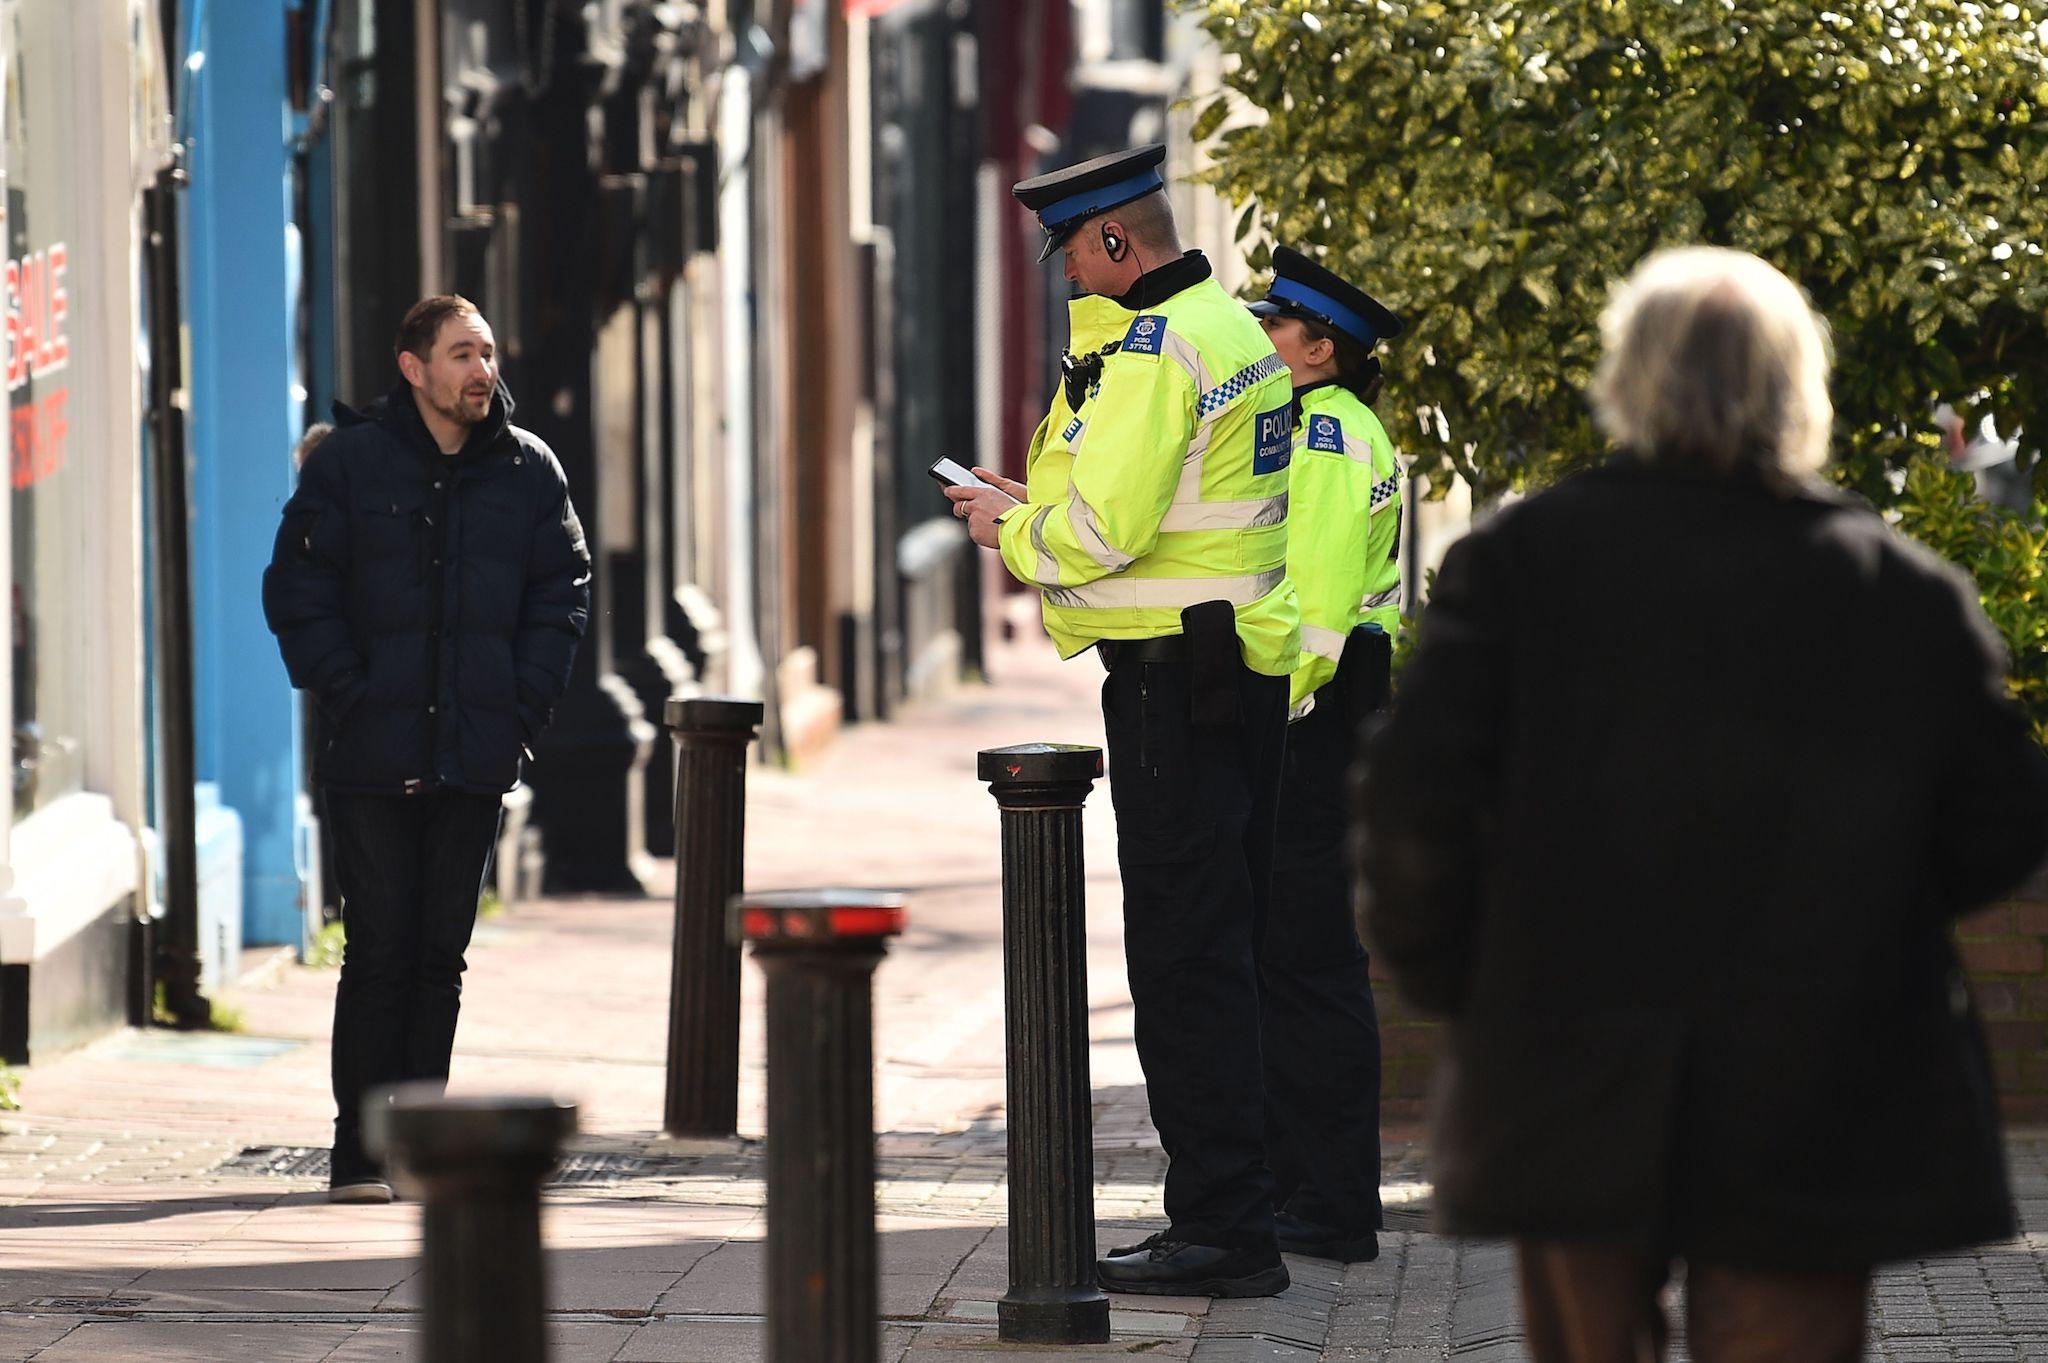 Police community support officers talk to a man on a street in Brighton during the lockdown (GLYN KIRK/AFP/Getty)